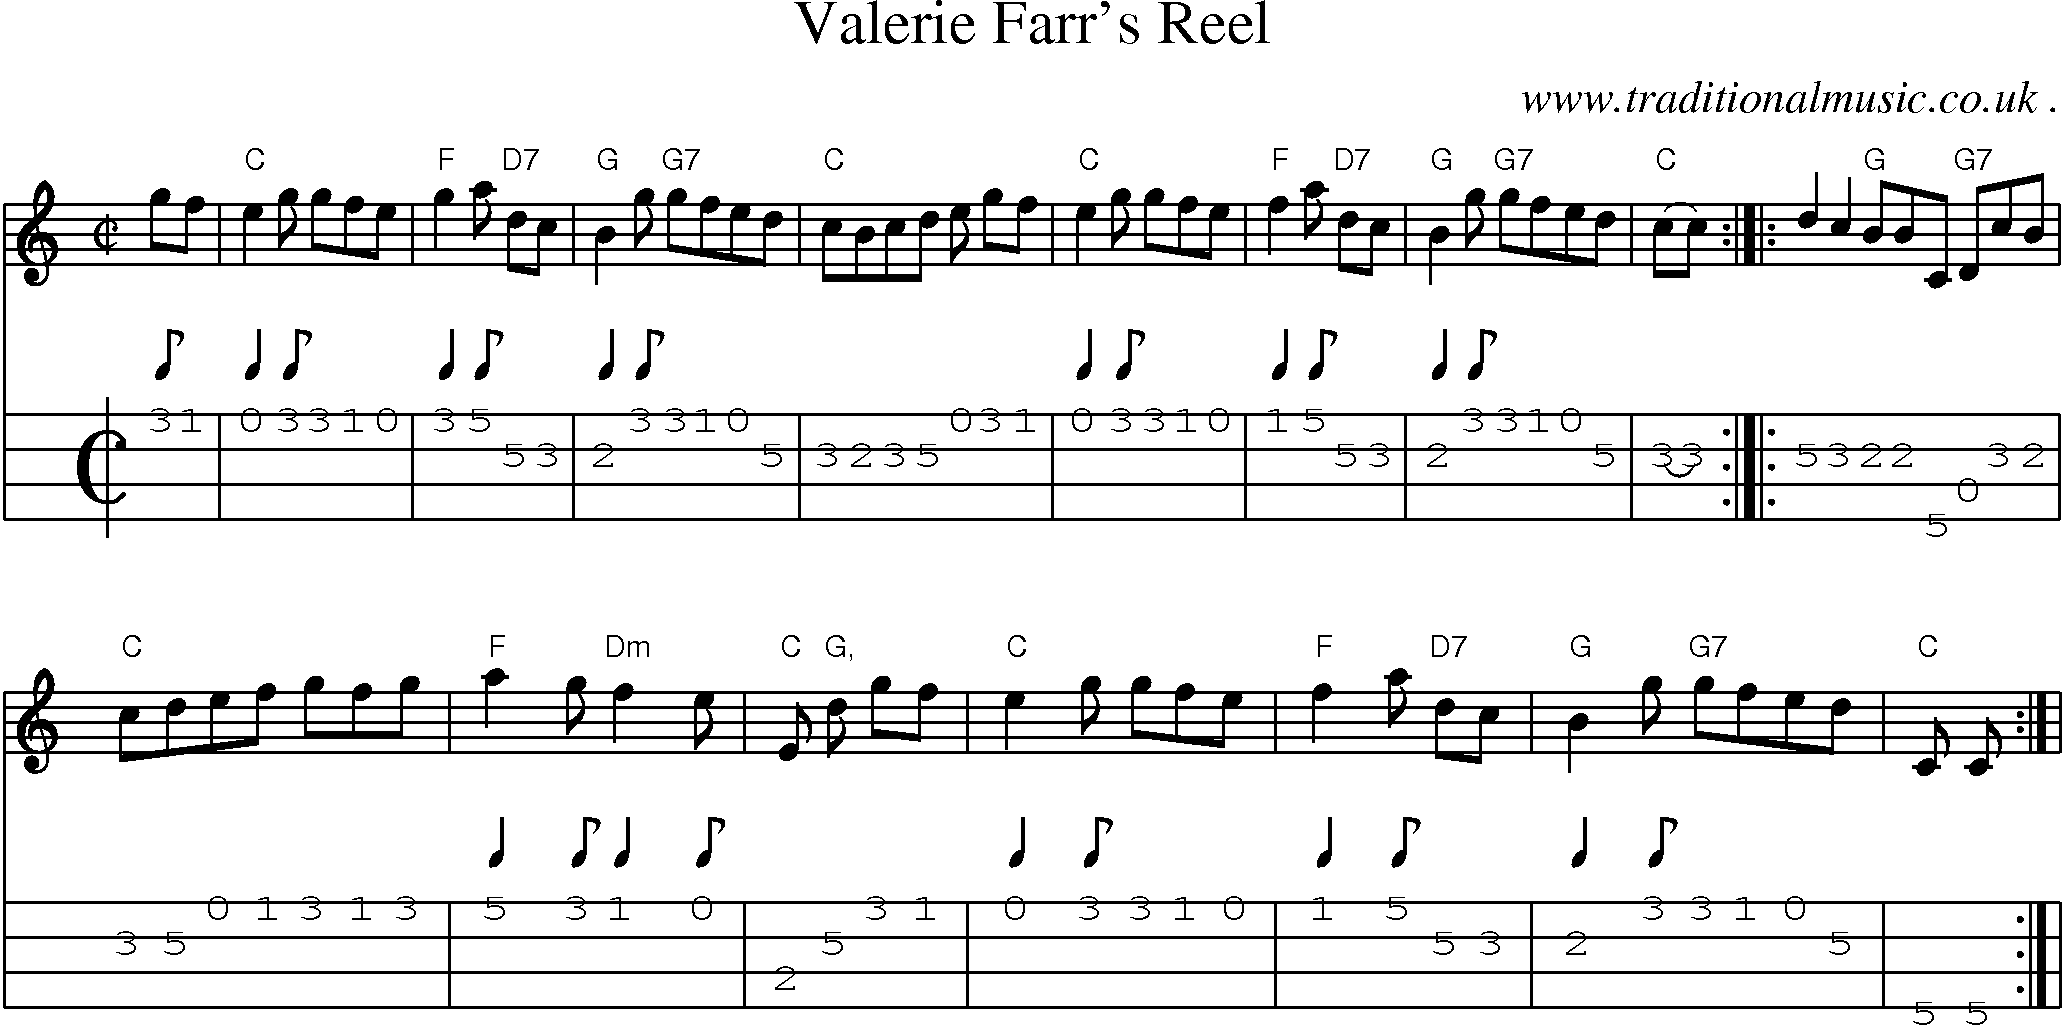 Sheet-music  score, Chords and Mandolin Tabs for Valerie Farrs Reel